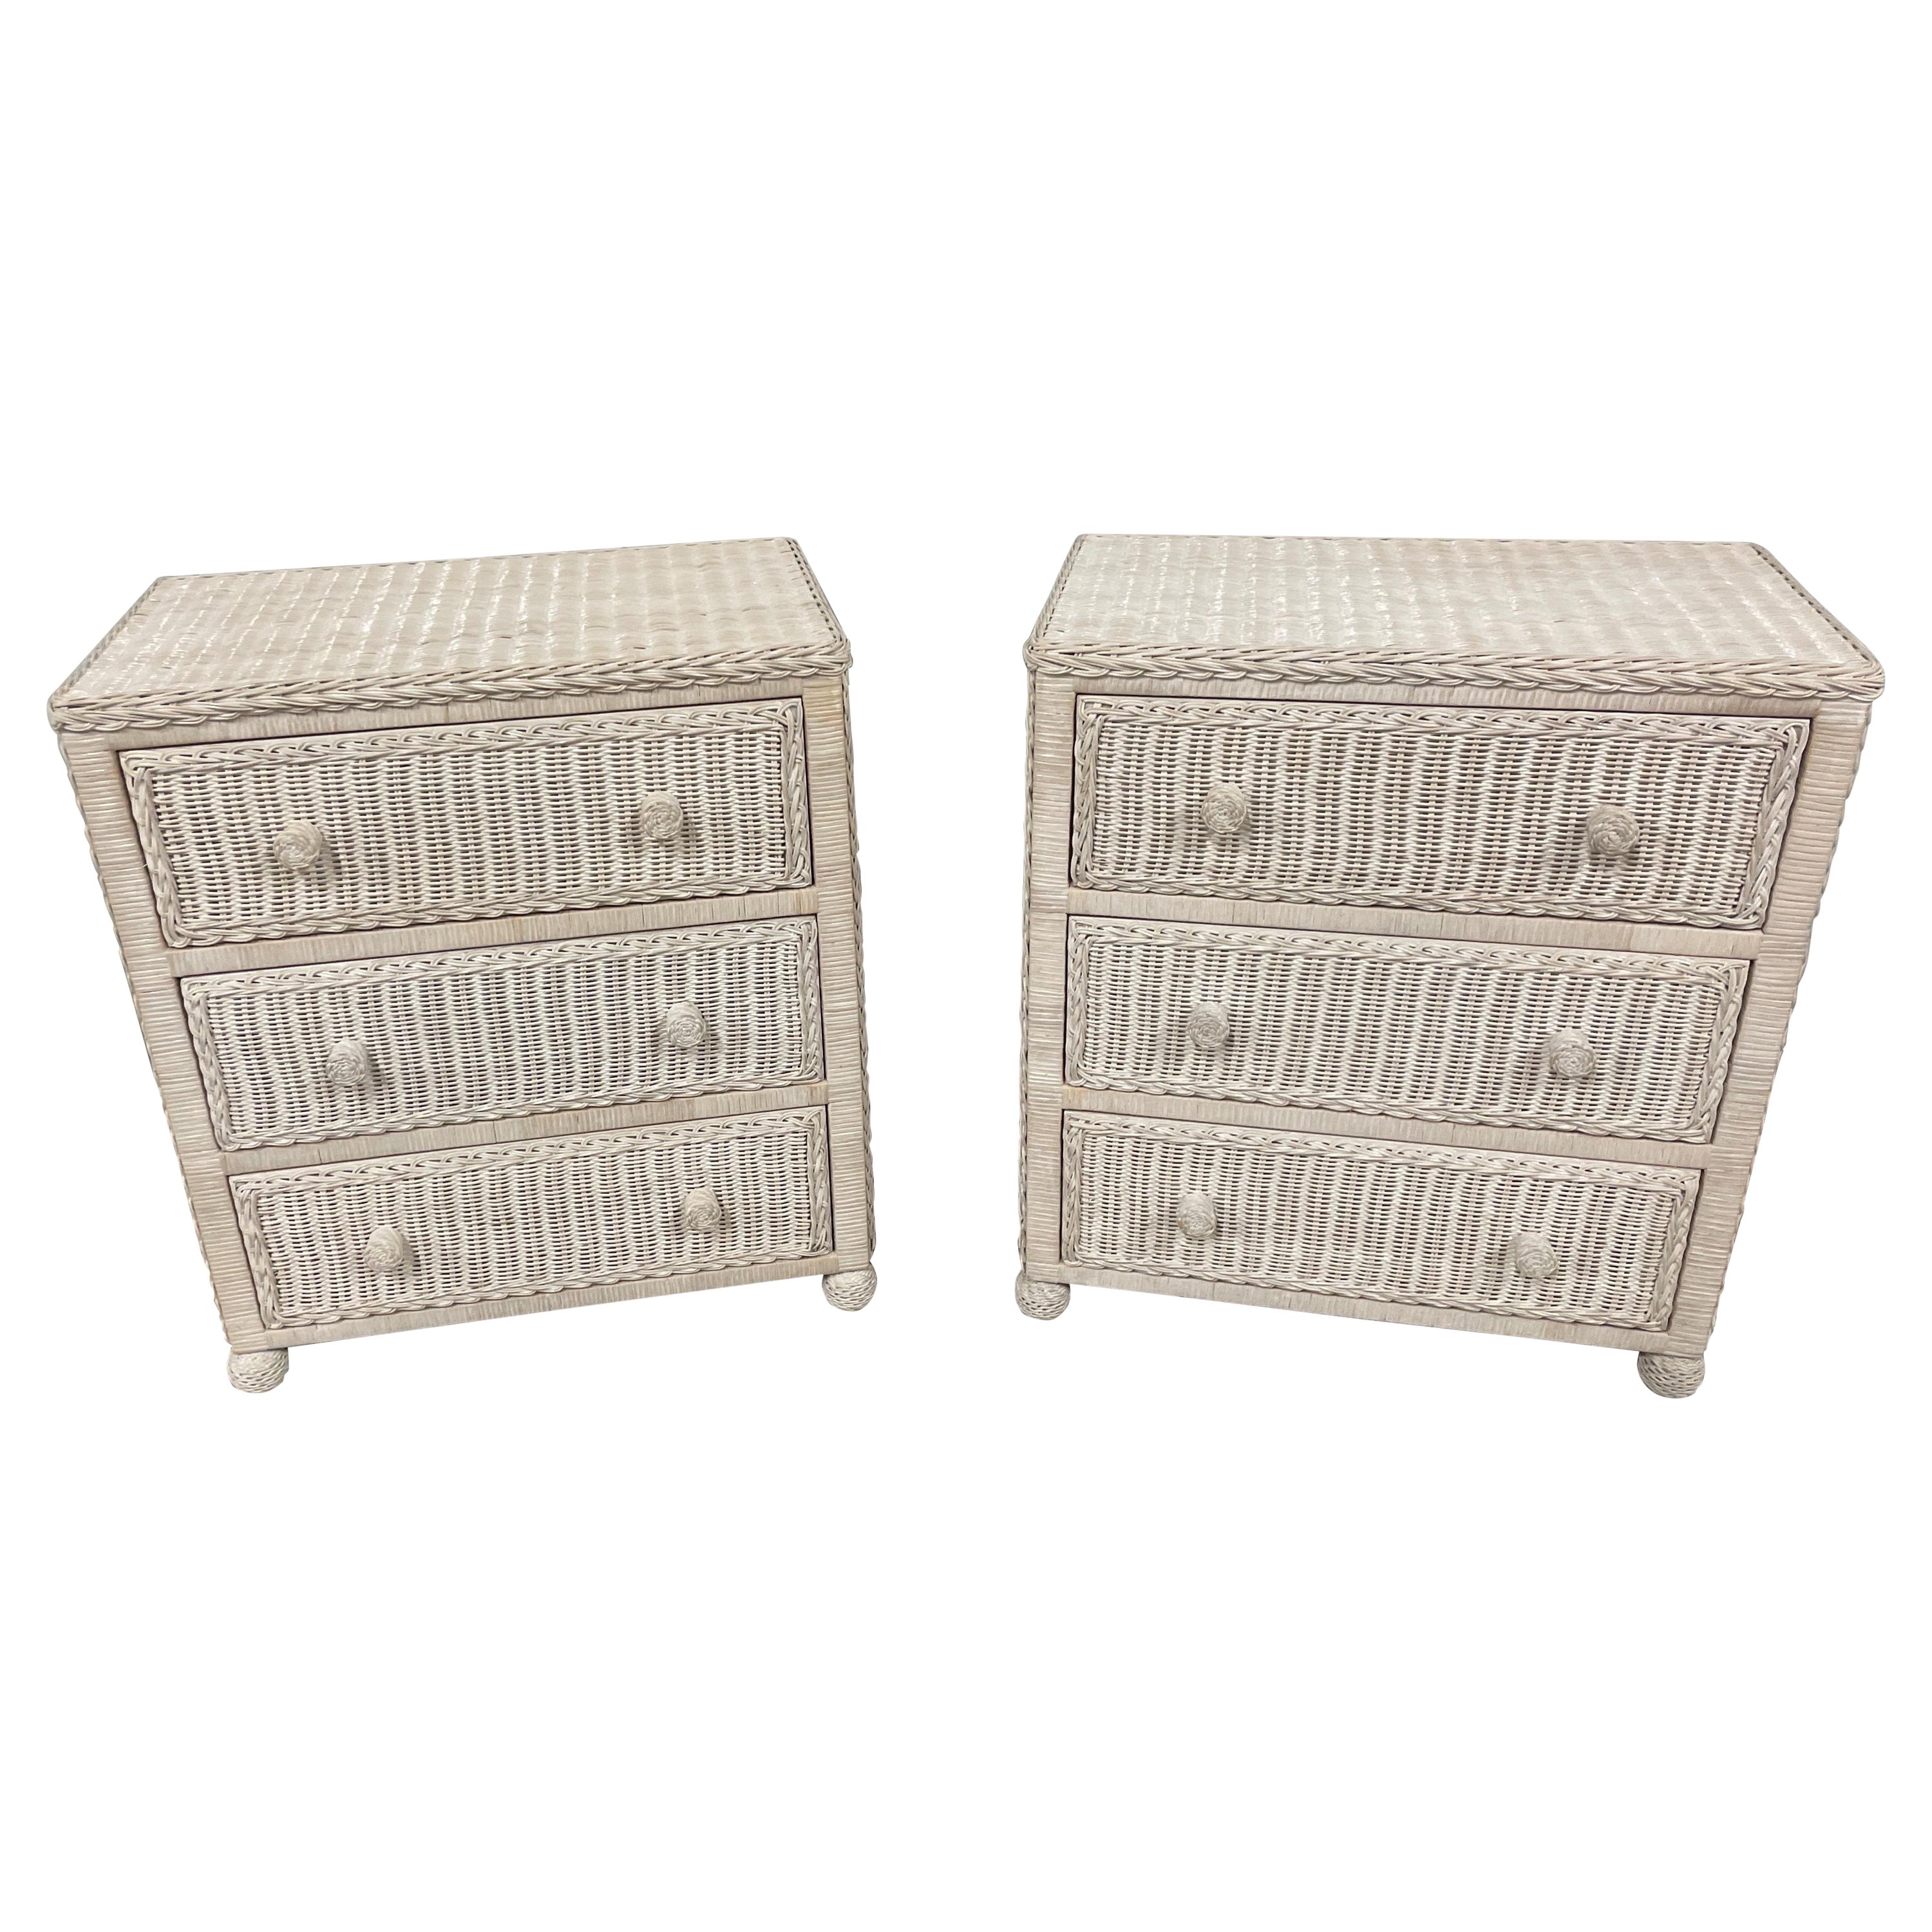 Pair of White Wicker Dressers / Nightstands For Sale